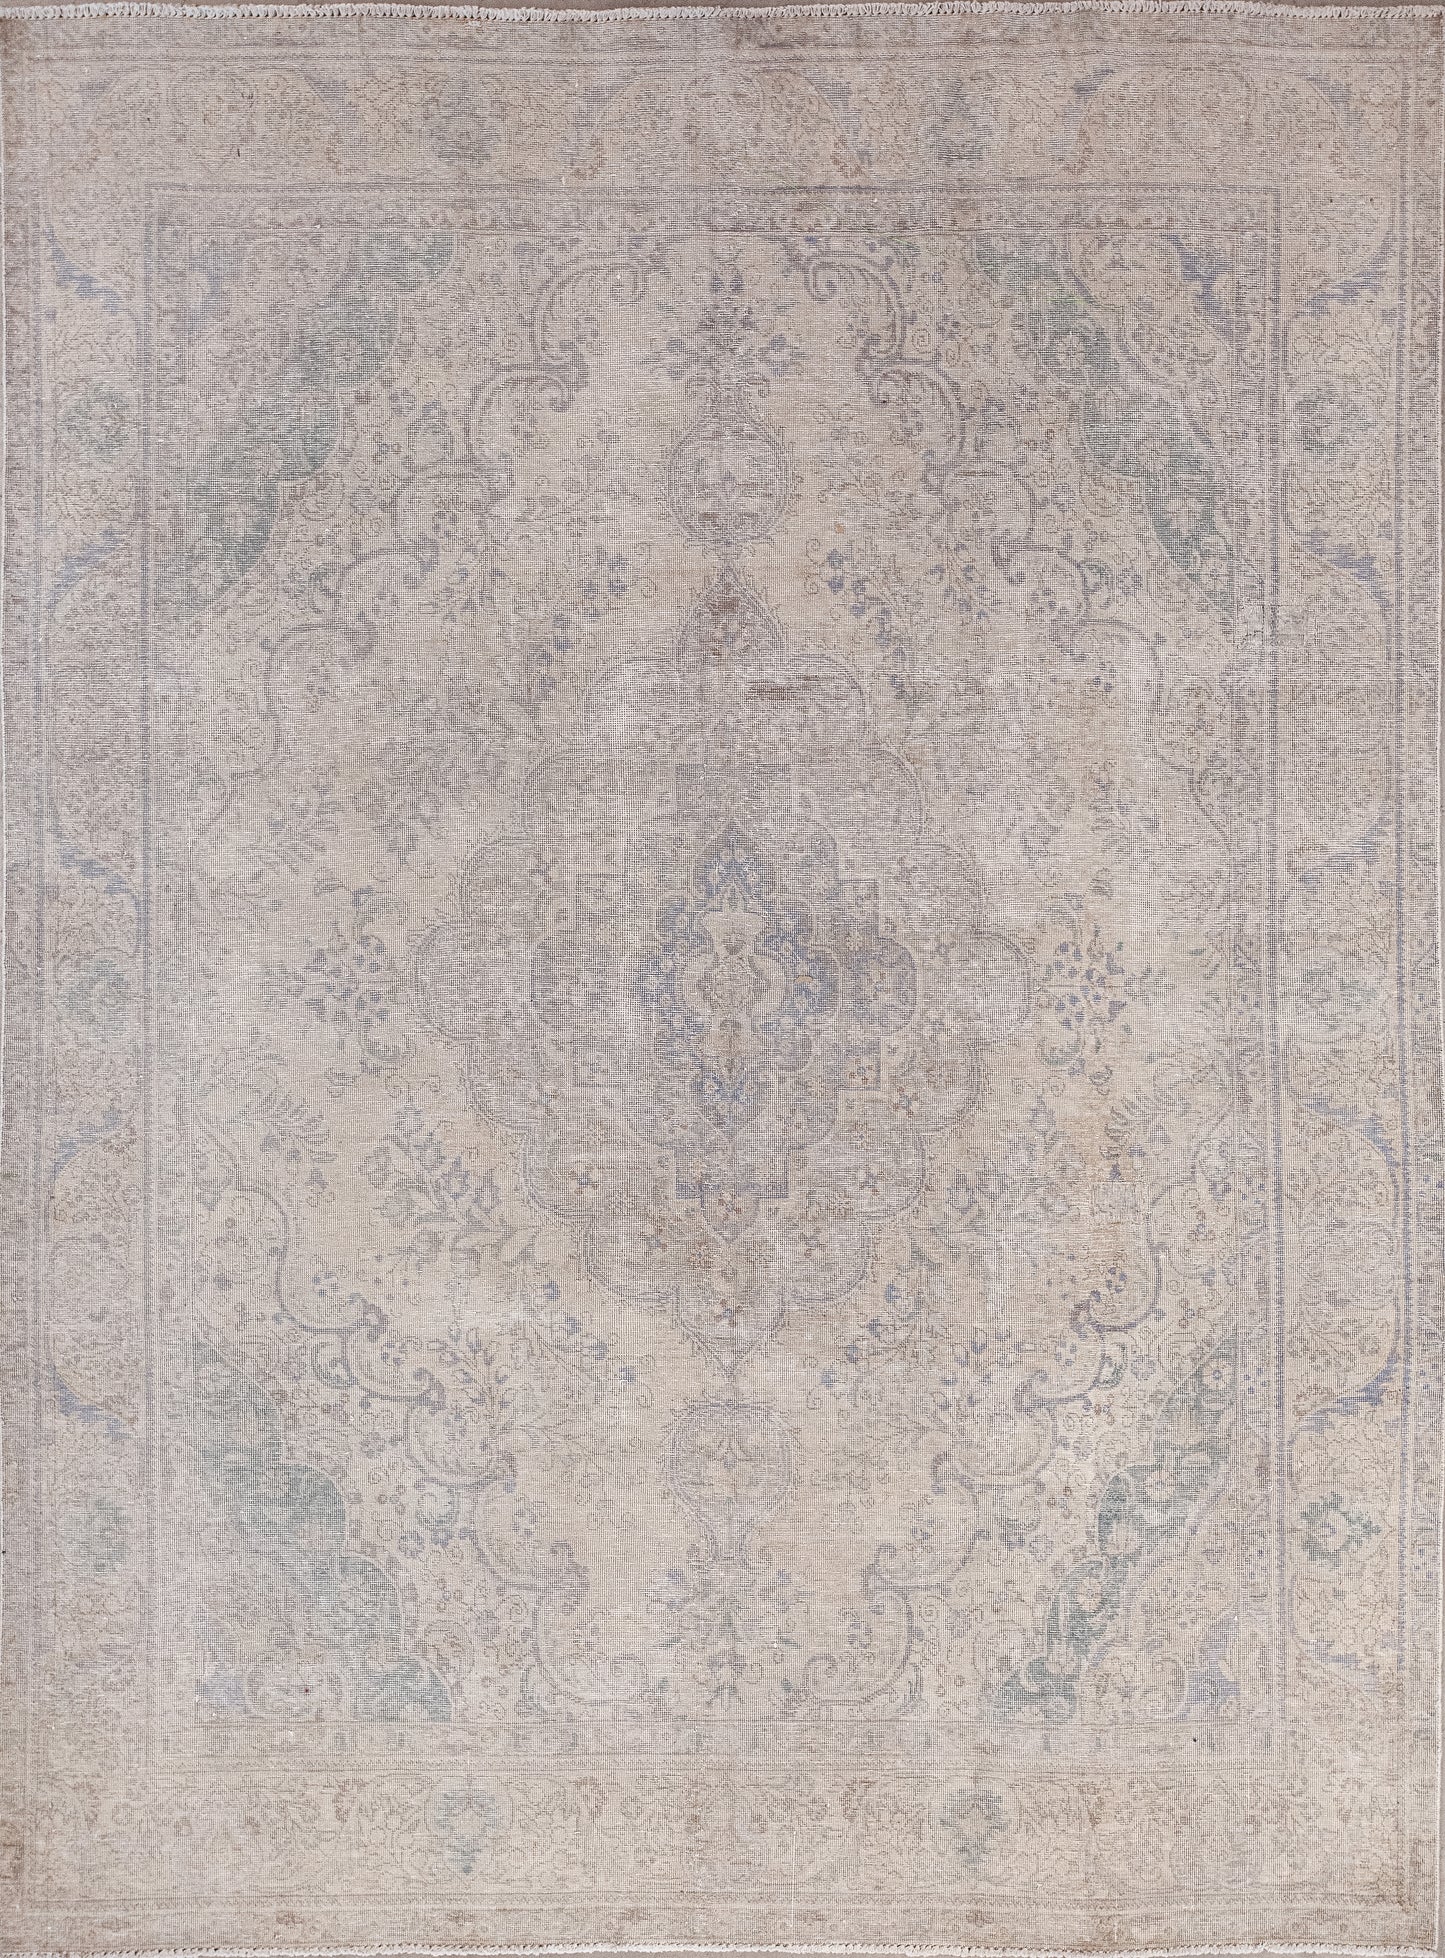 This traditional rug was woven in hues of royalty. The aged natural color scheme has beige for the background, gray for the pattern. The combination of both restrains the contrast. 